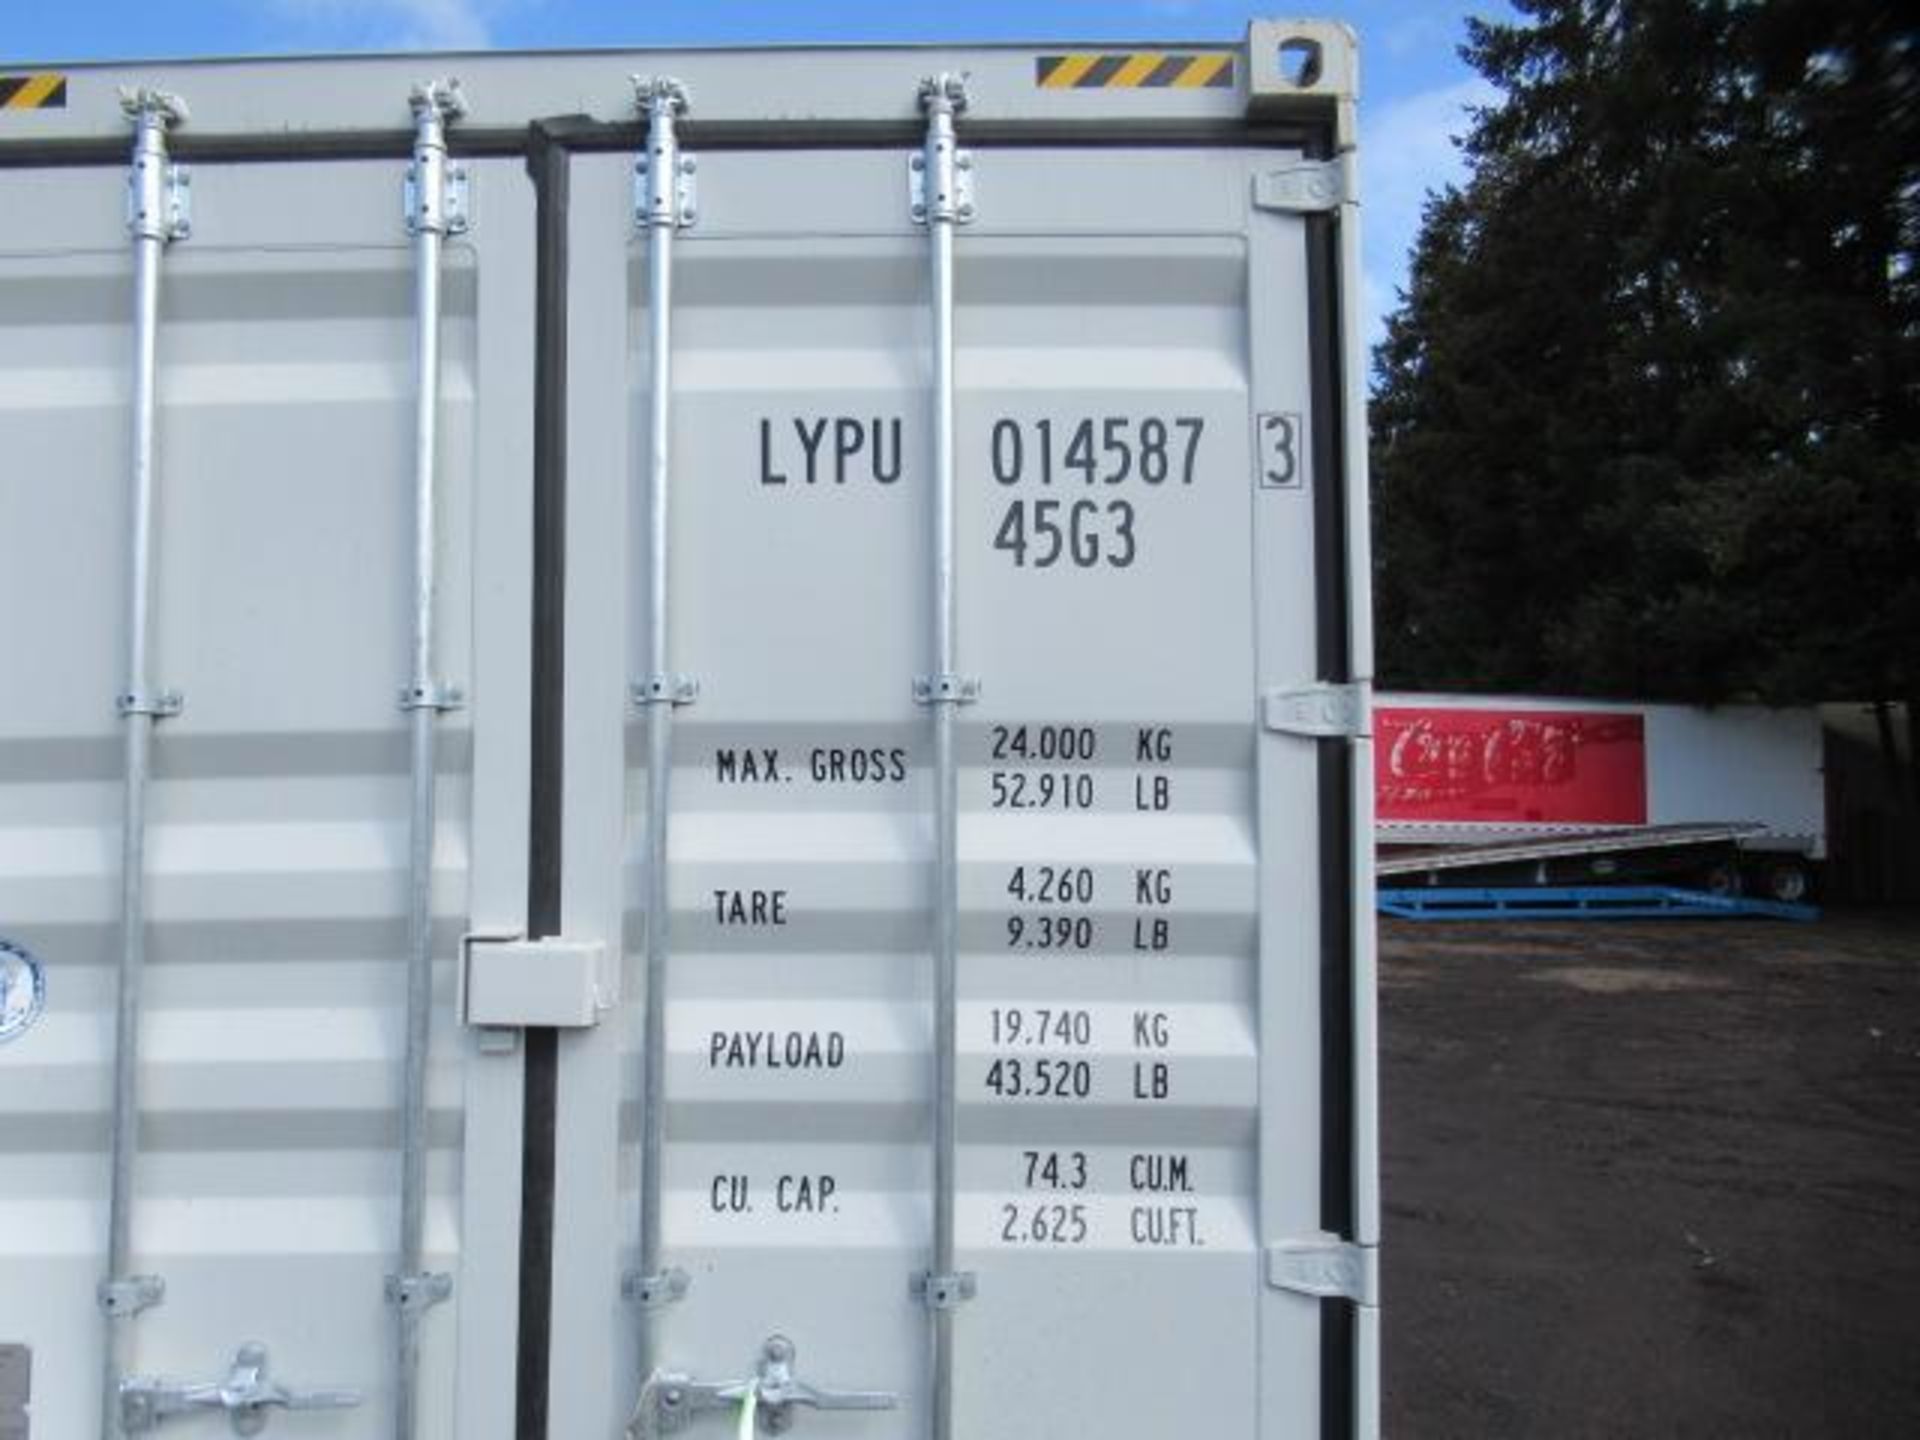 2024 40' HIGH CUBE SHIPPING CONTAINER W/ (4) SIDE DOORS, SER#: LYPU0145873 (UNUSED) - Image 6 of 6